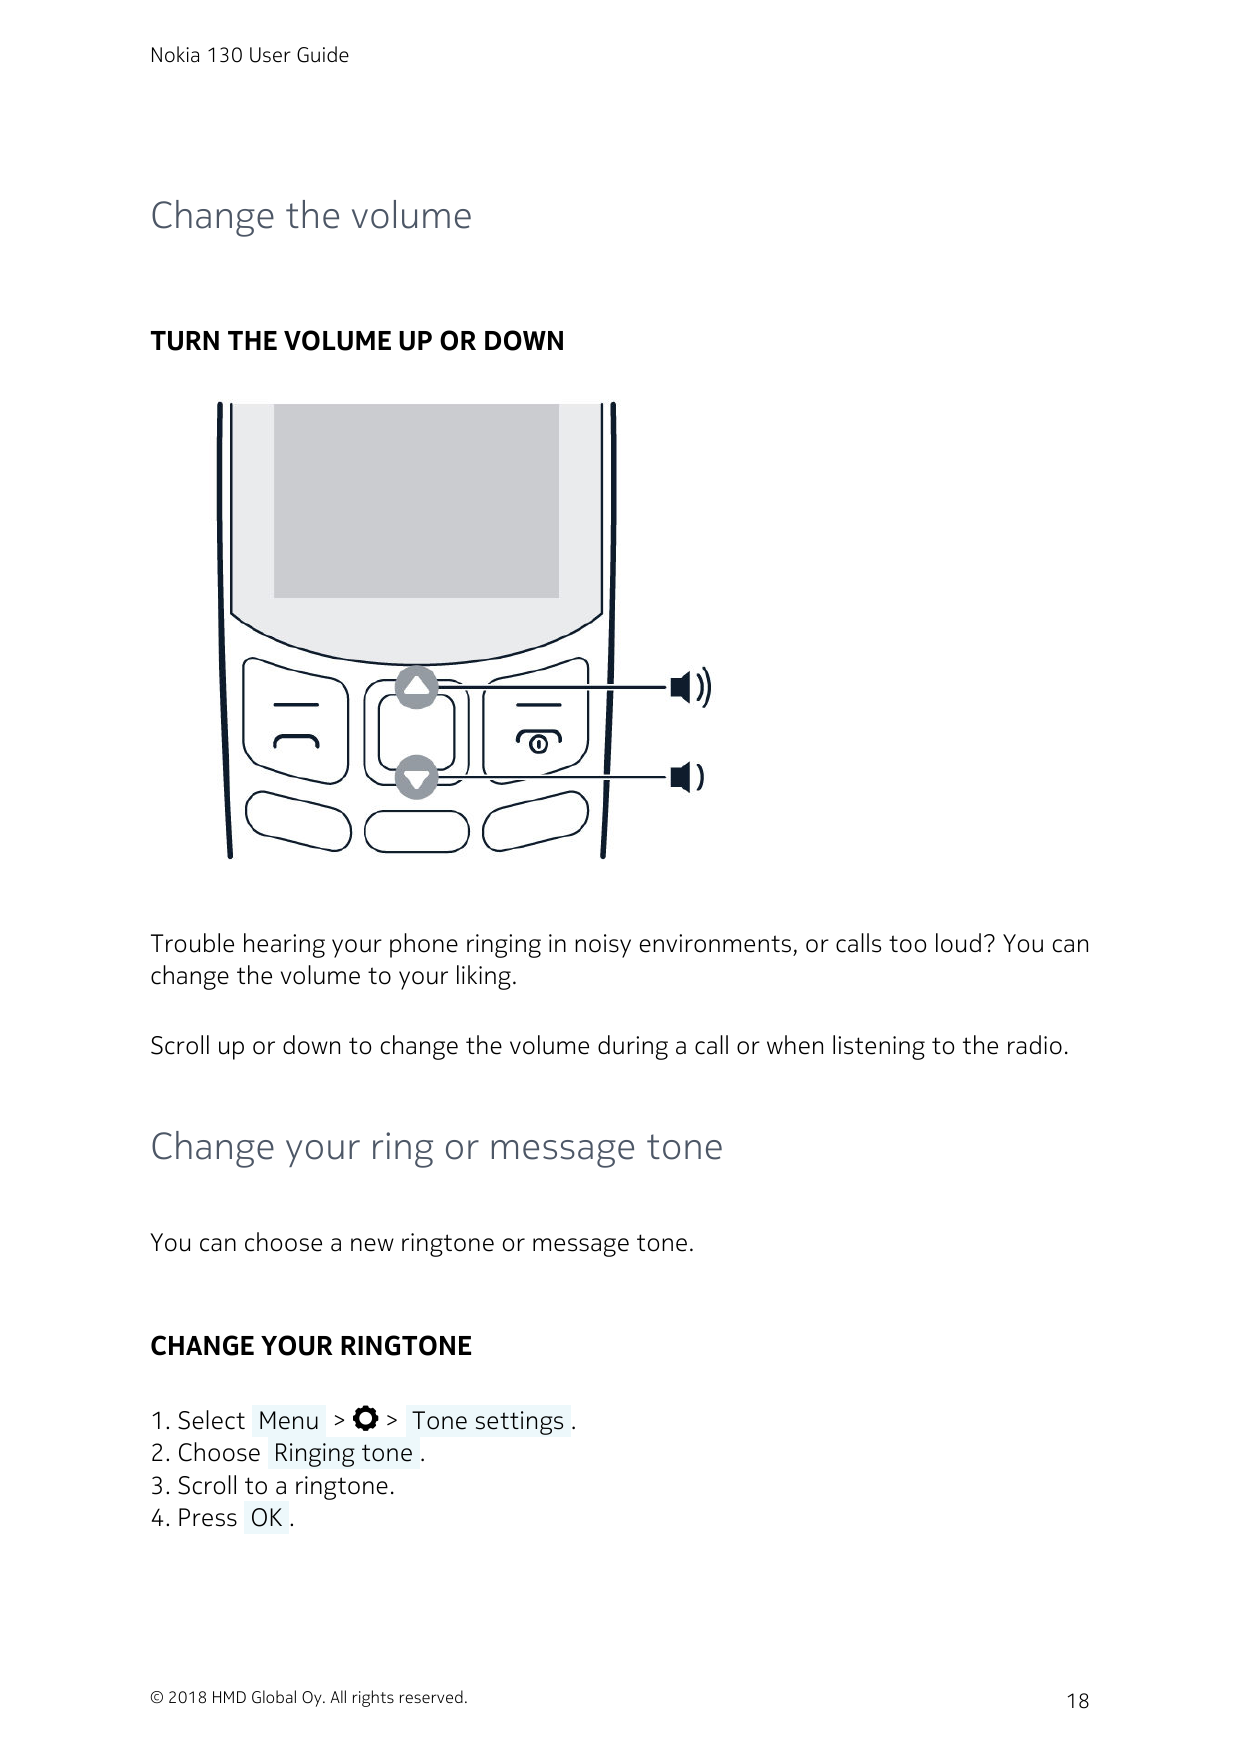 Nokia 130 User GuideChange the volumeTURN THE VOLUME UP OR DOWNTrouble hearing your phone ringing in noisy environments, or call